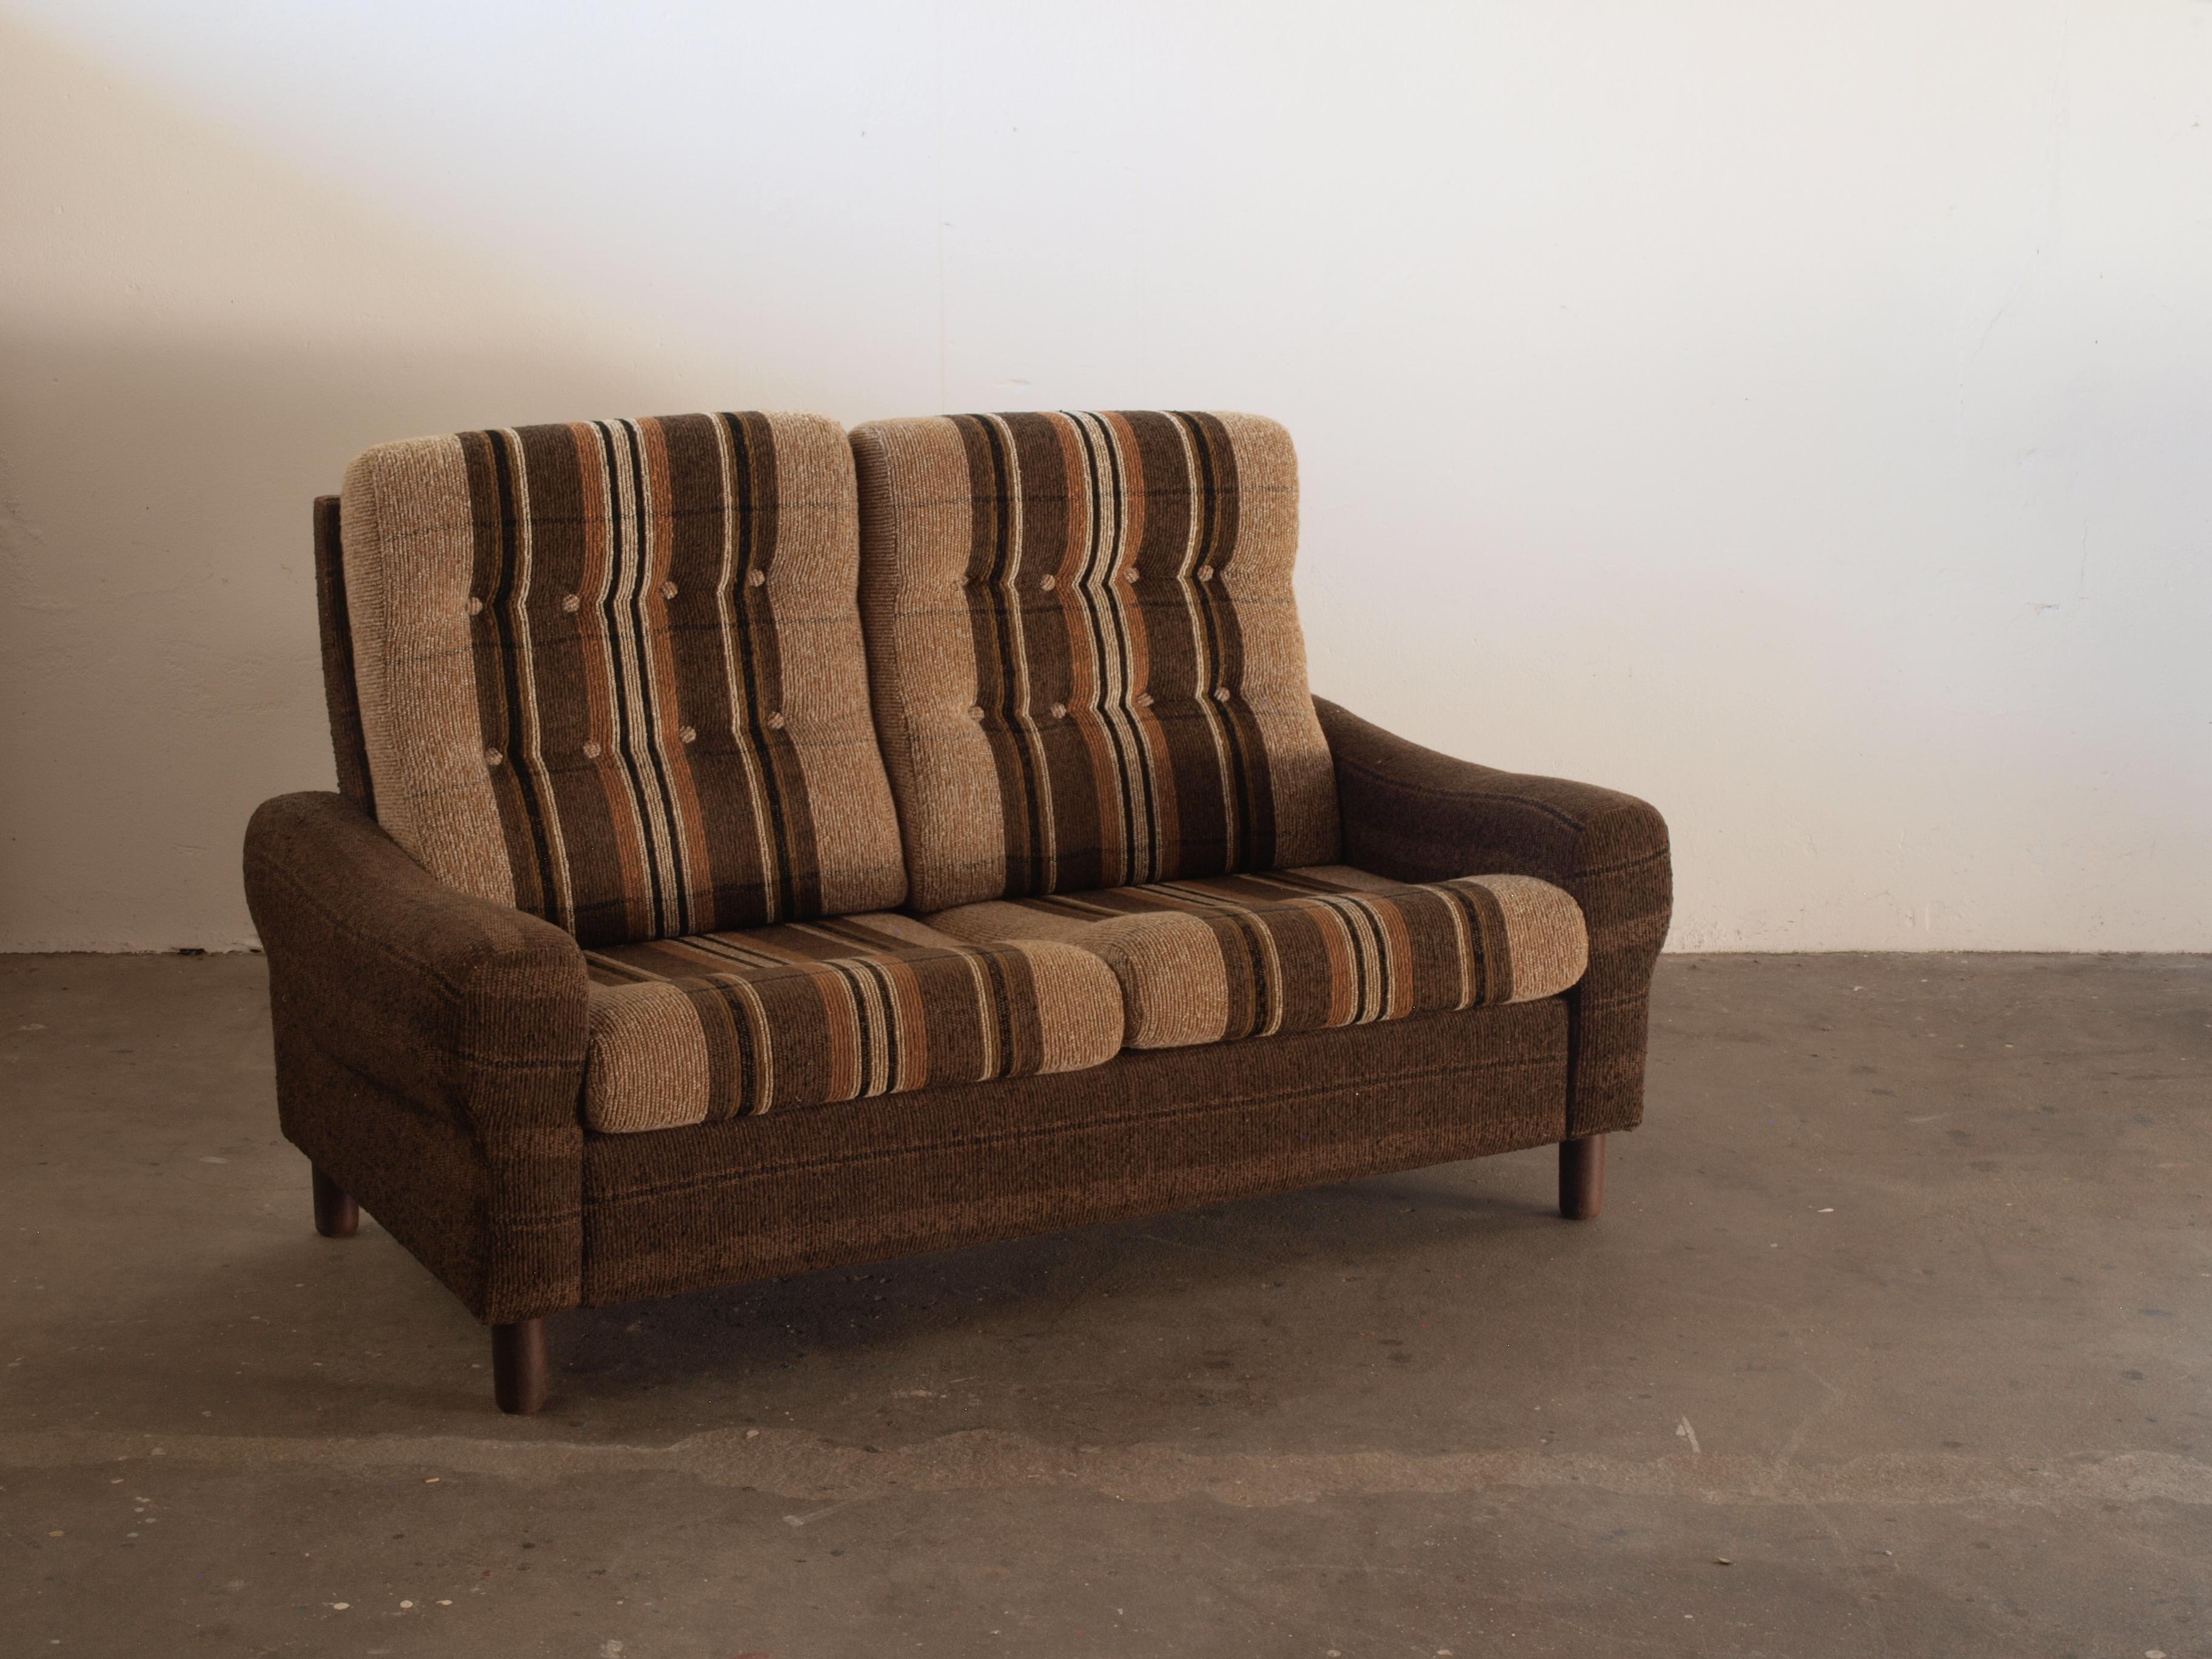 Beautiful little 2 seater sofa from the Danish design period of the 1970s. It is in thick wool, that has a warm in the color.

It is in really good condition, very strong fabric and no holes or damage. Small size that can be fitted in every room and